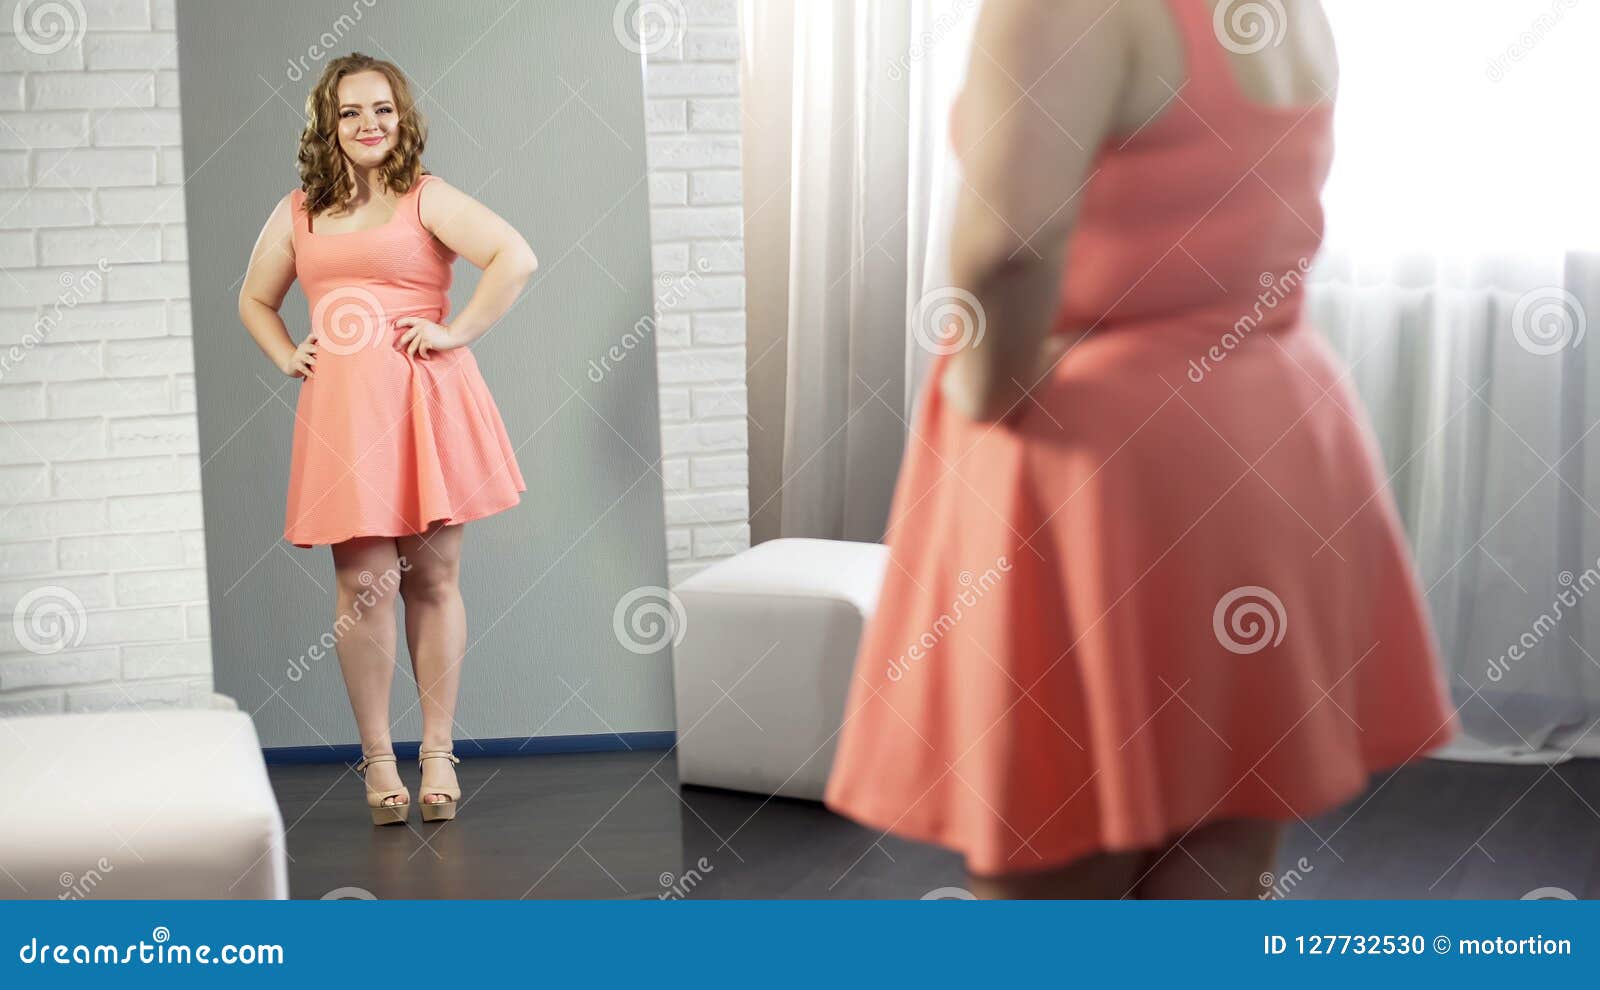 cheerful overweight young lady smiling at her reflection, body positivity